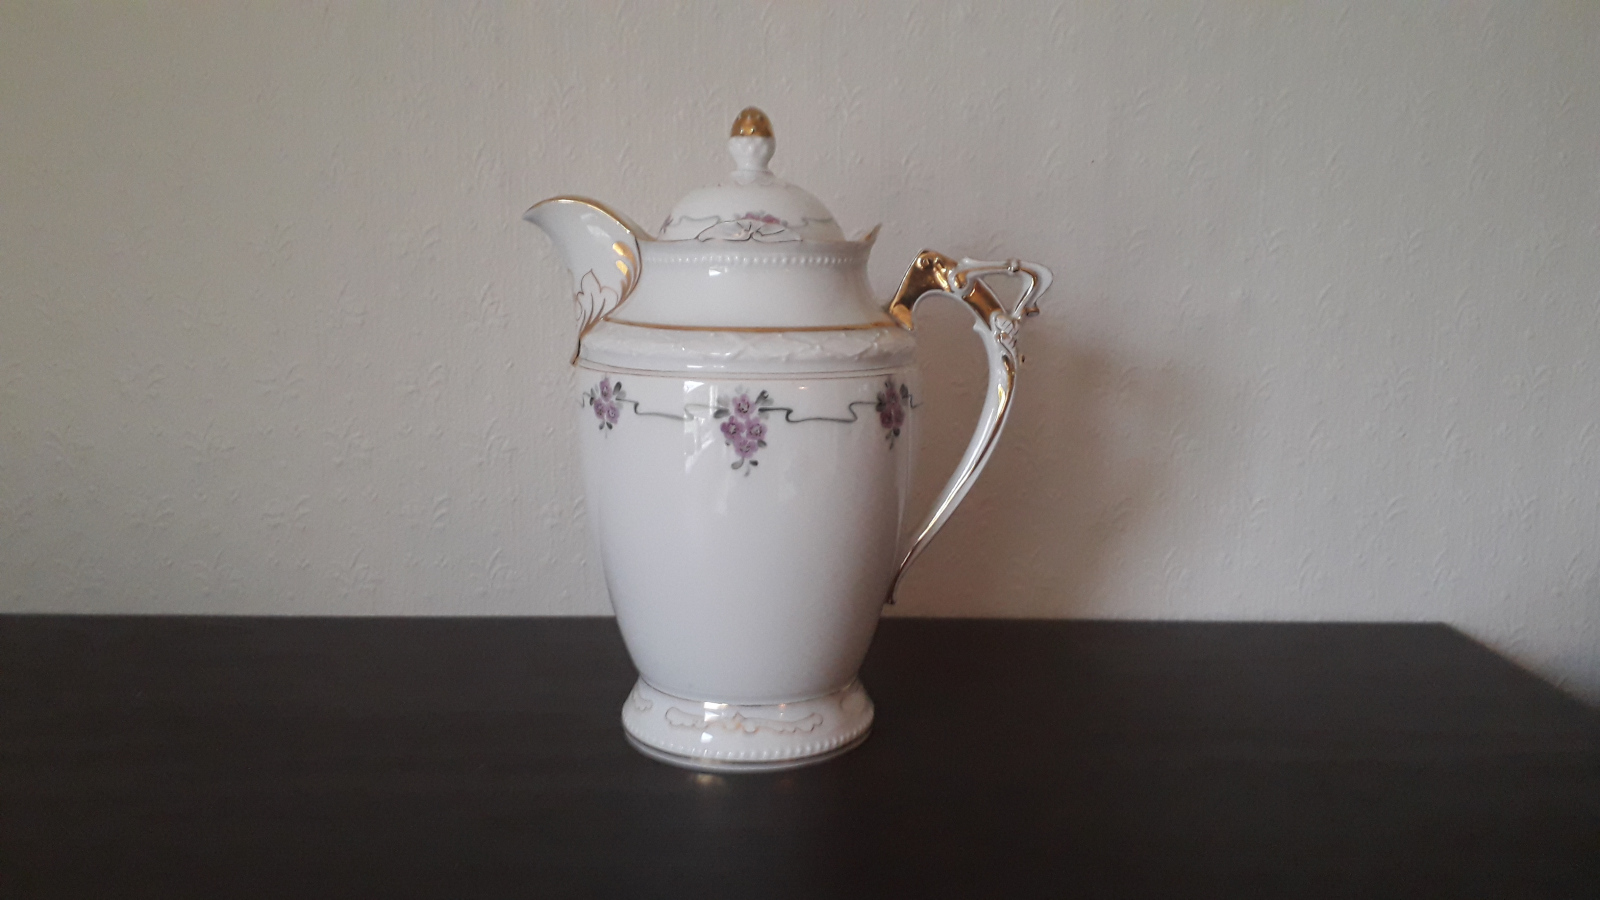 Niedersaltzbrunn Hermann Ohme chocolate pot with relief, pink flowers and gold decor